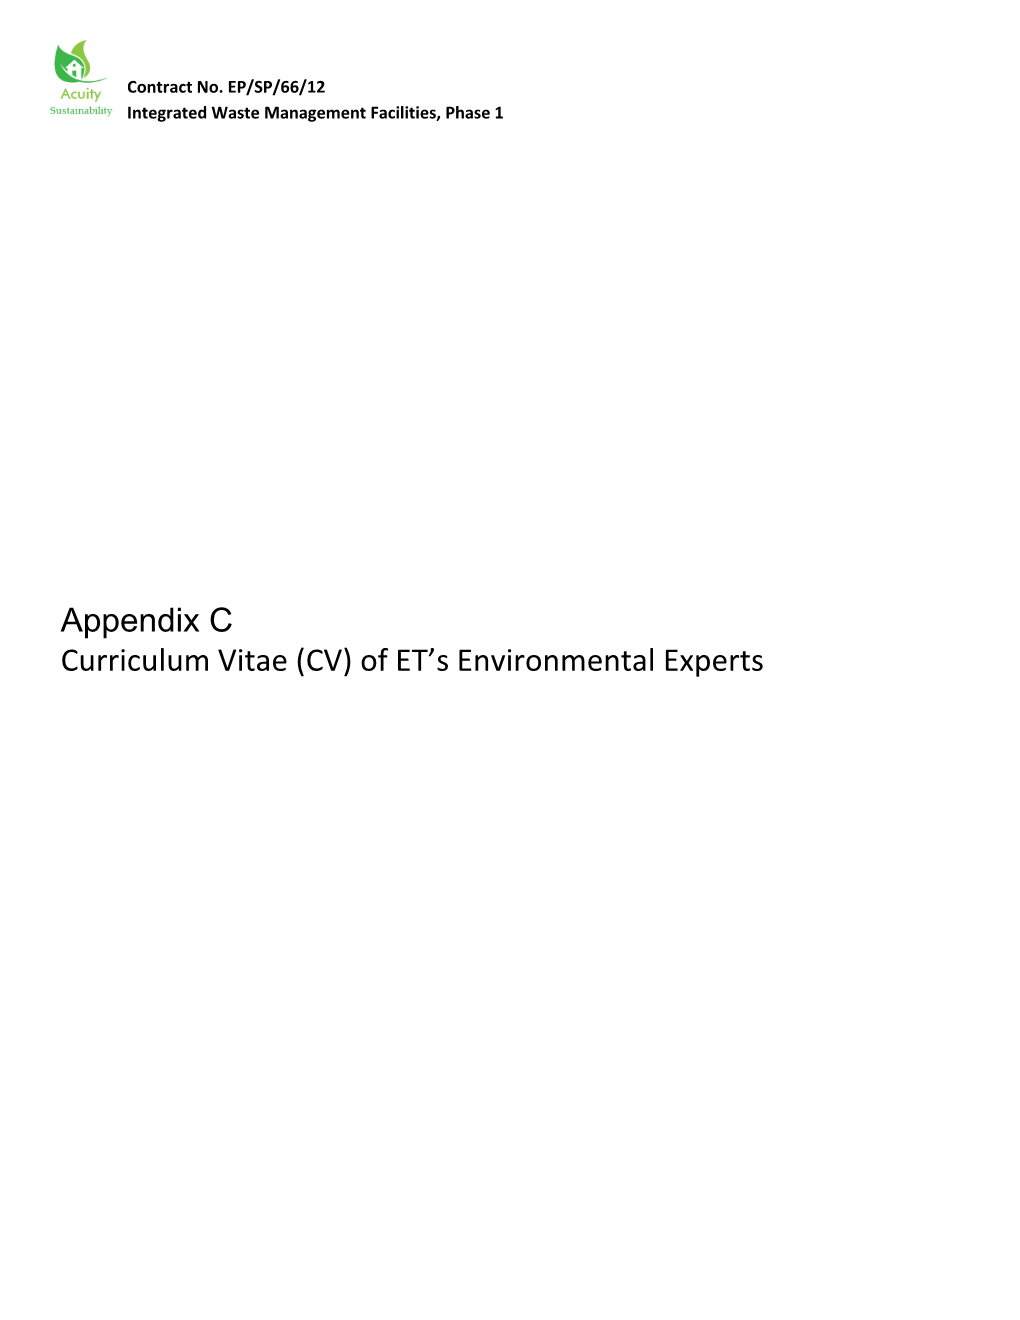 Of ET's Environmental Experts